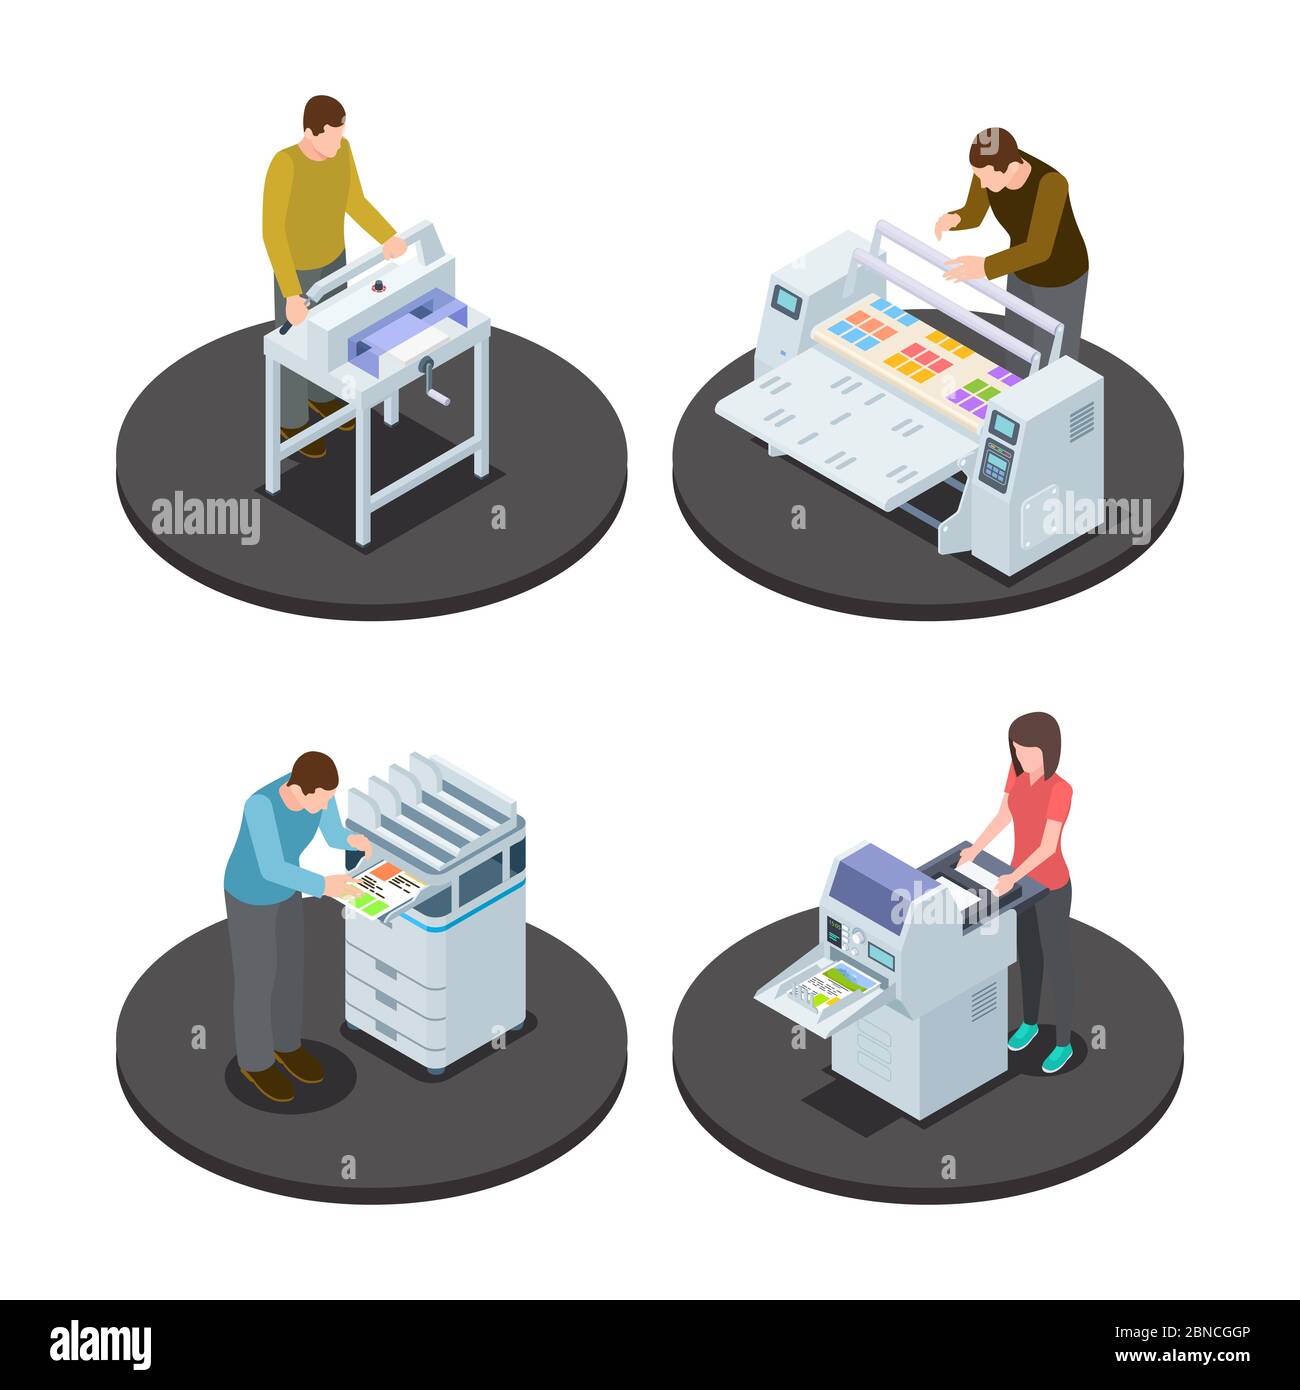 https://c8.alamy.com/comp/2BNCGGP/isometric-printing-house-icons-concept-with-digital-rotary-large-format-and-offset-production-types-vector-illustration-isometric-equipment-print-industry-2BNCGGP.jpg